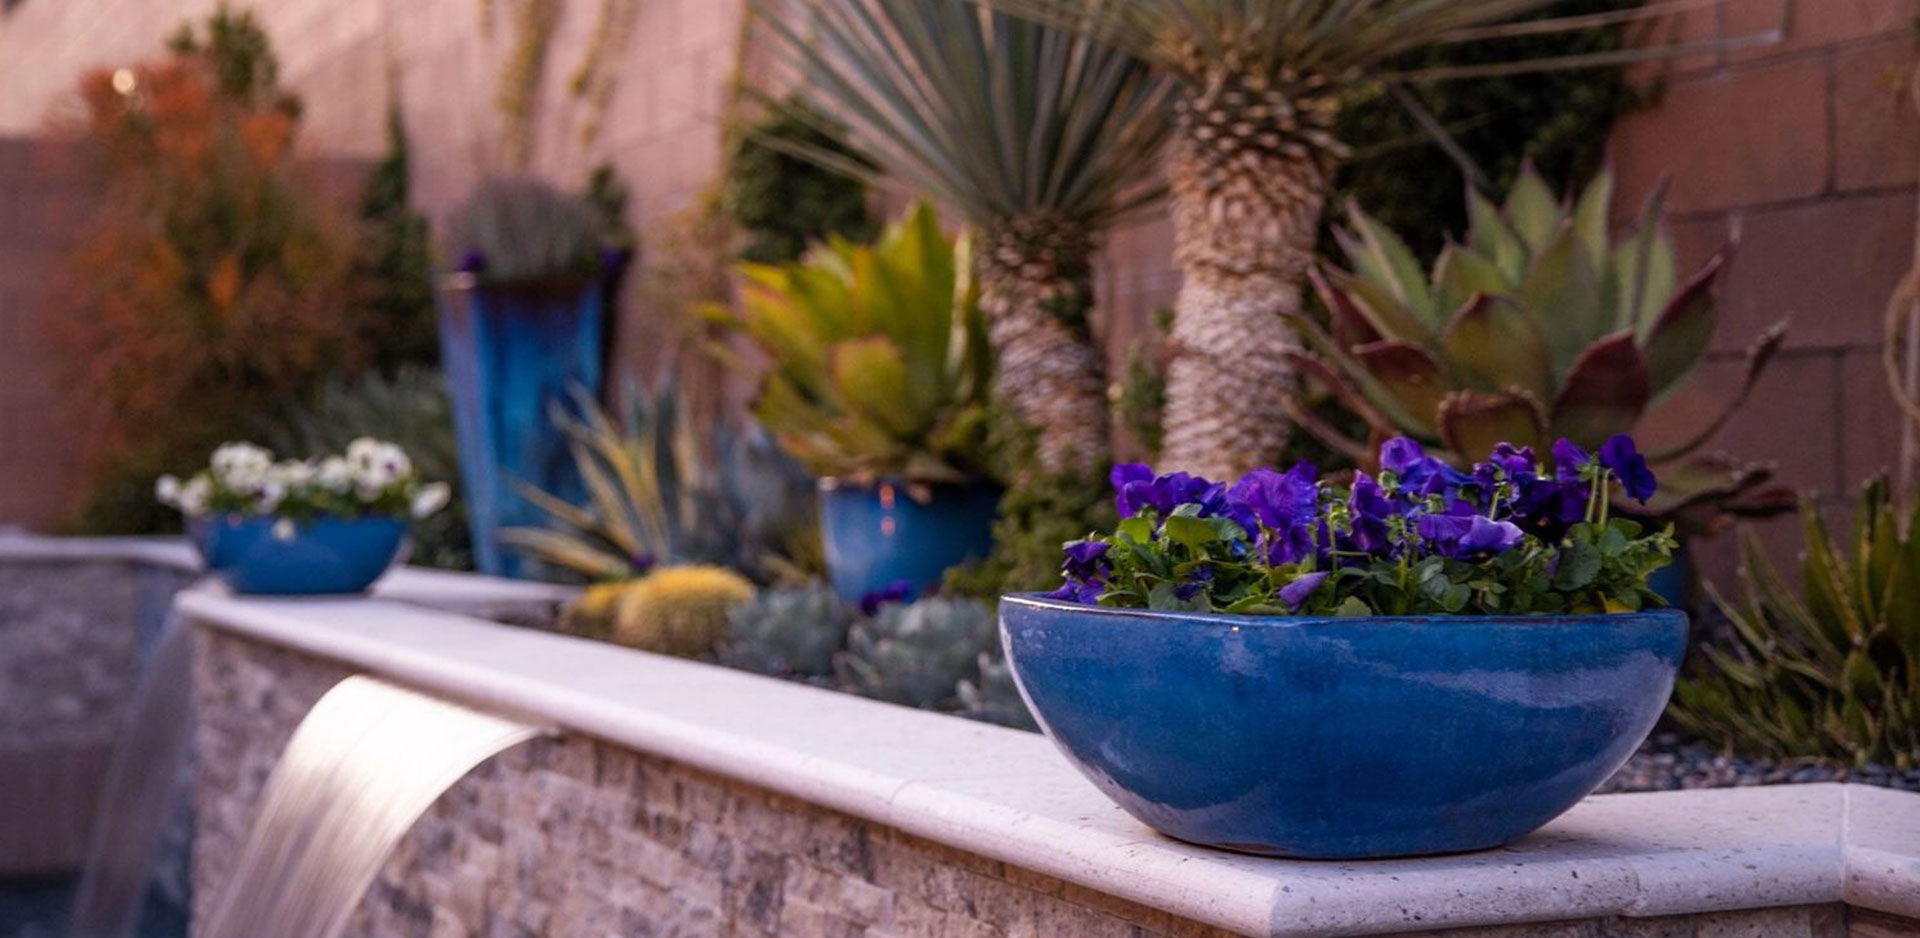 A blue bowl of flowers on the ledge